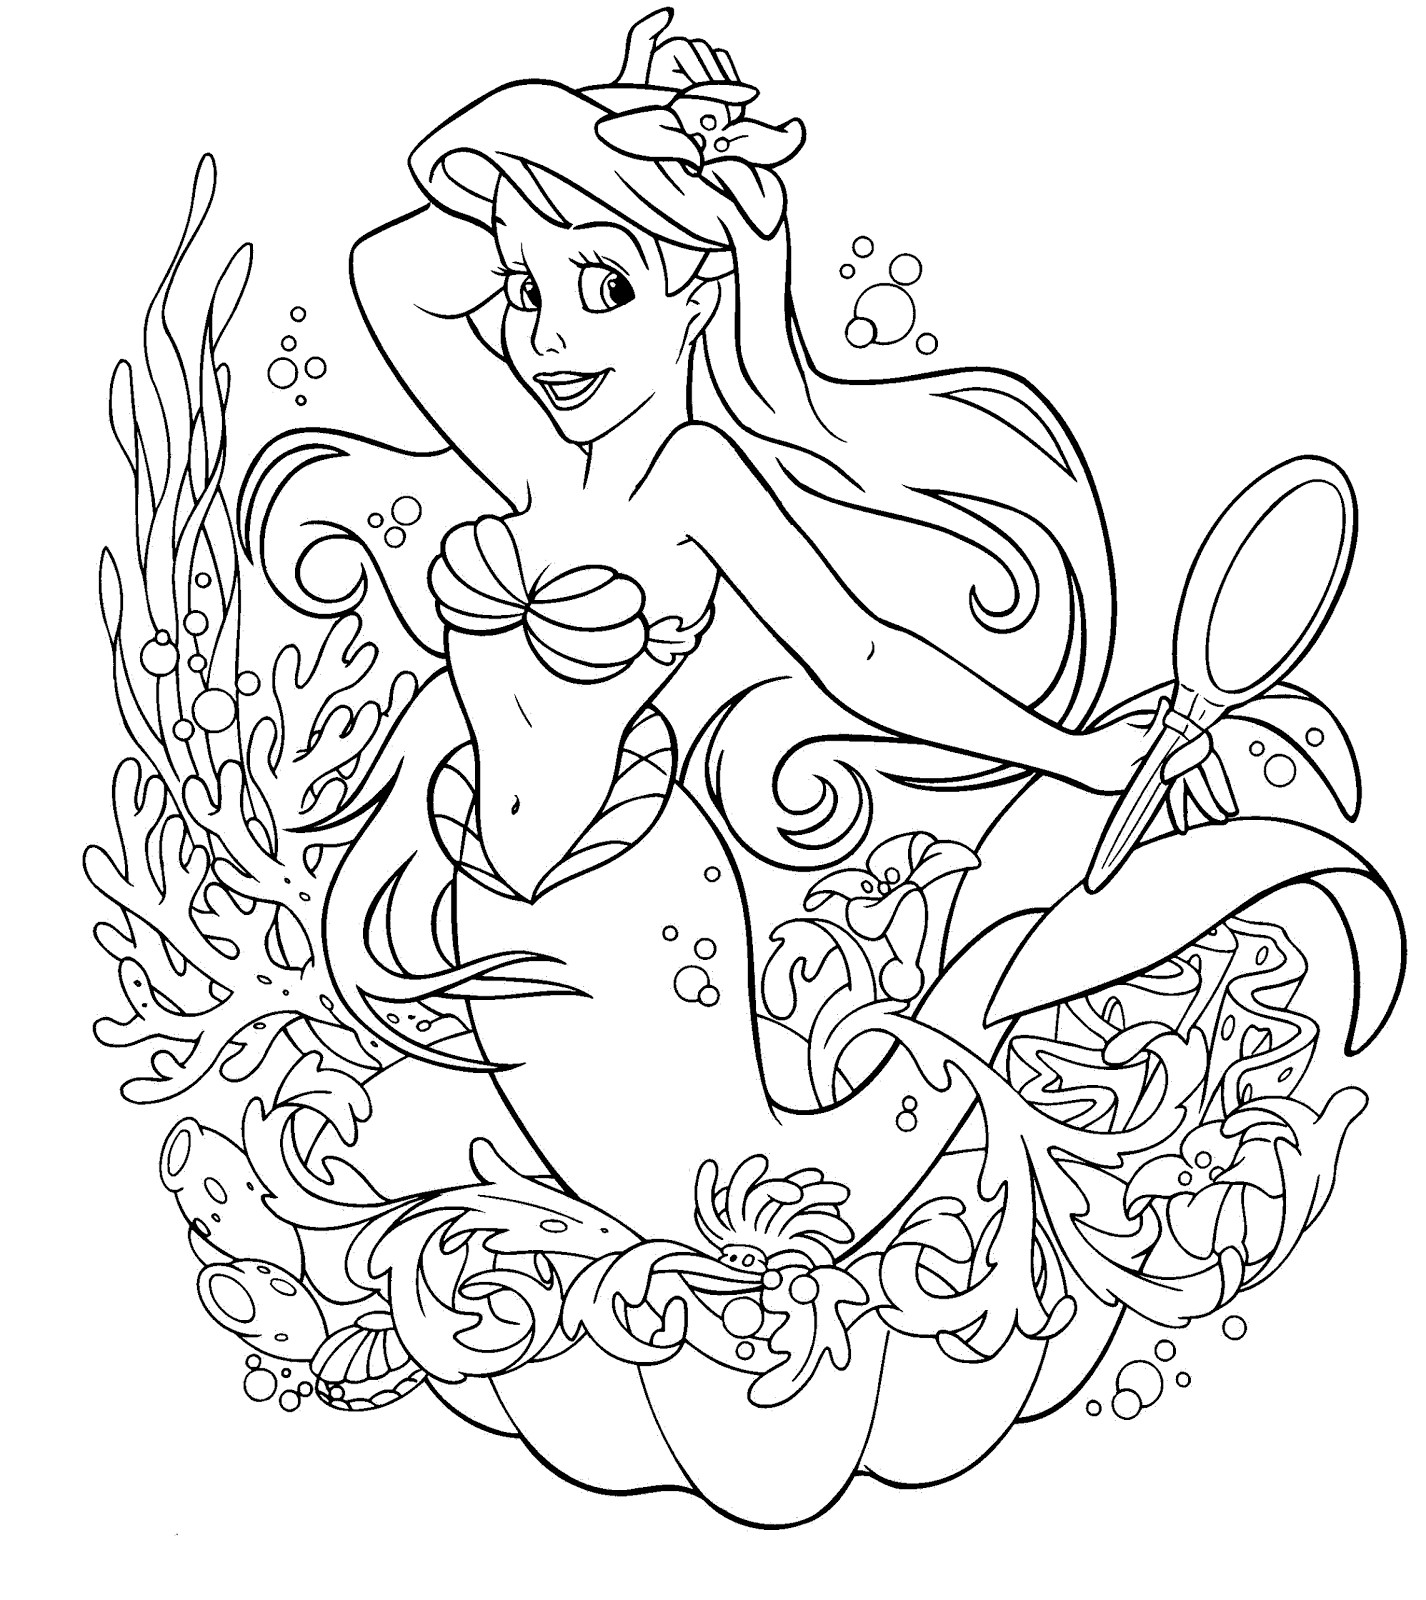 Mermaid Coloring Pages Free Printable
 Mermaid Birthday Party Coloring Pages